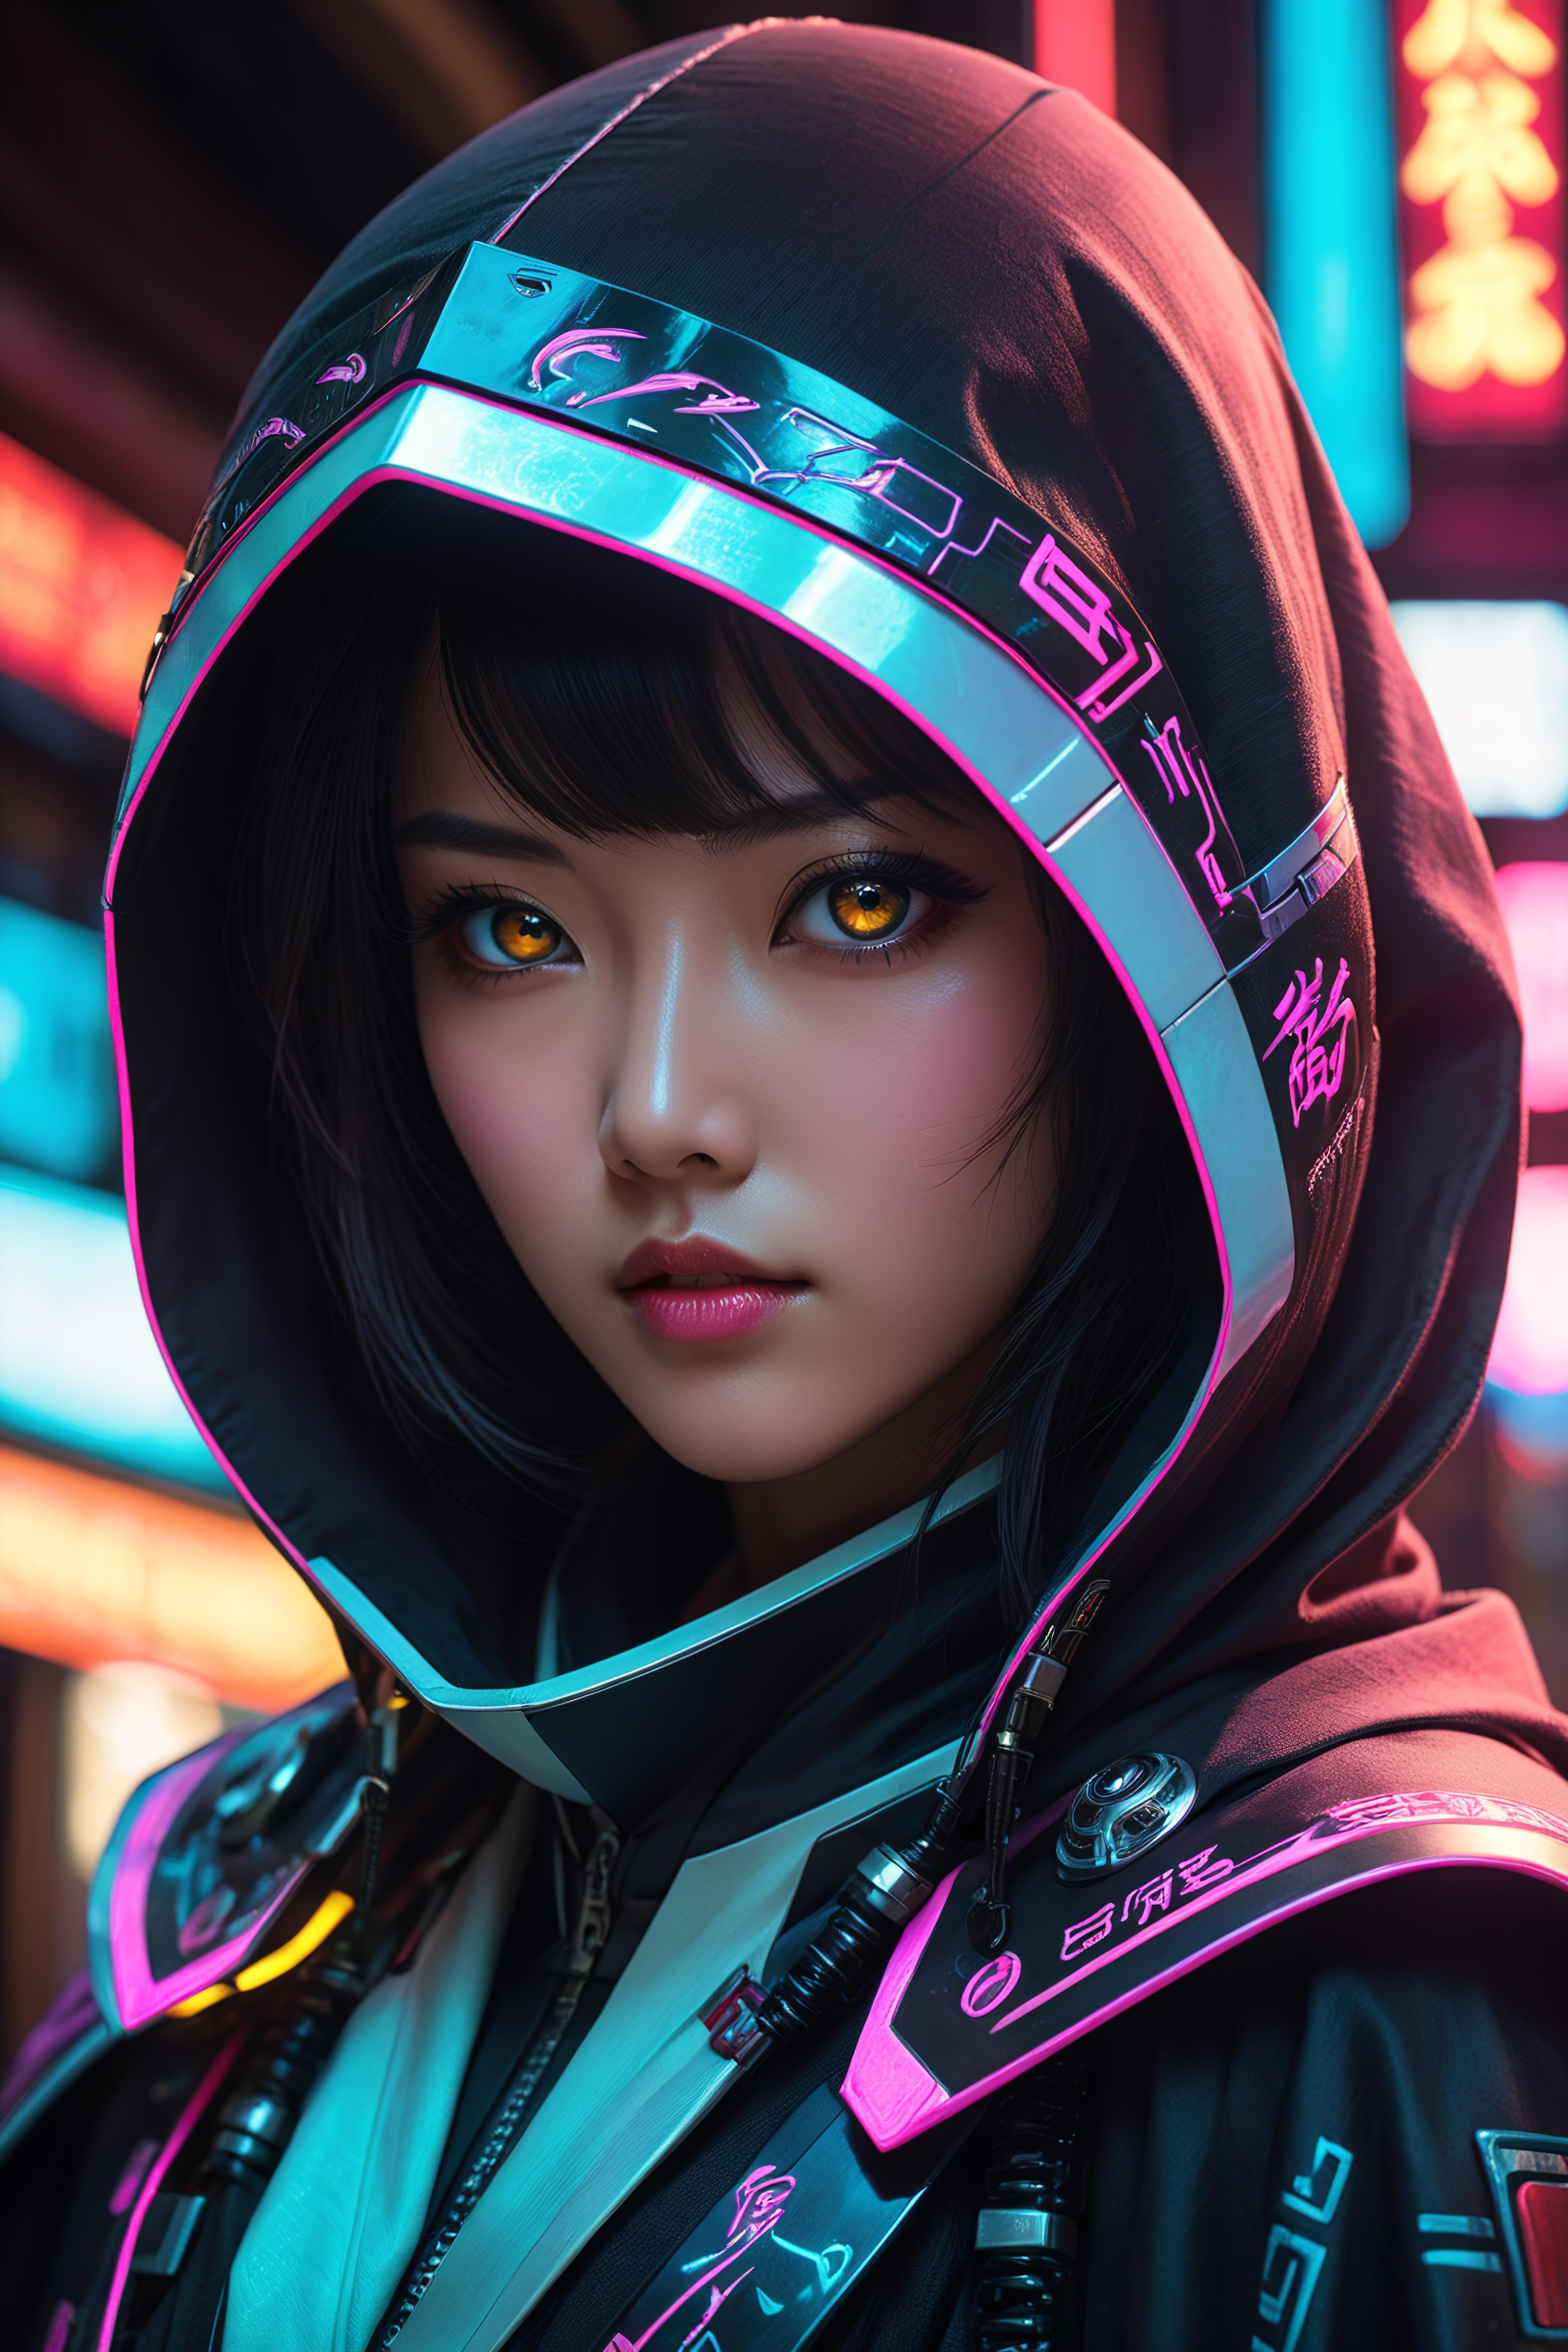 AI model image by Mr_fries1111